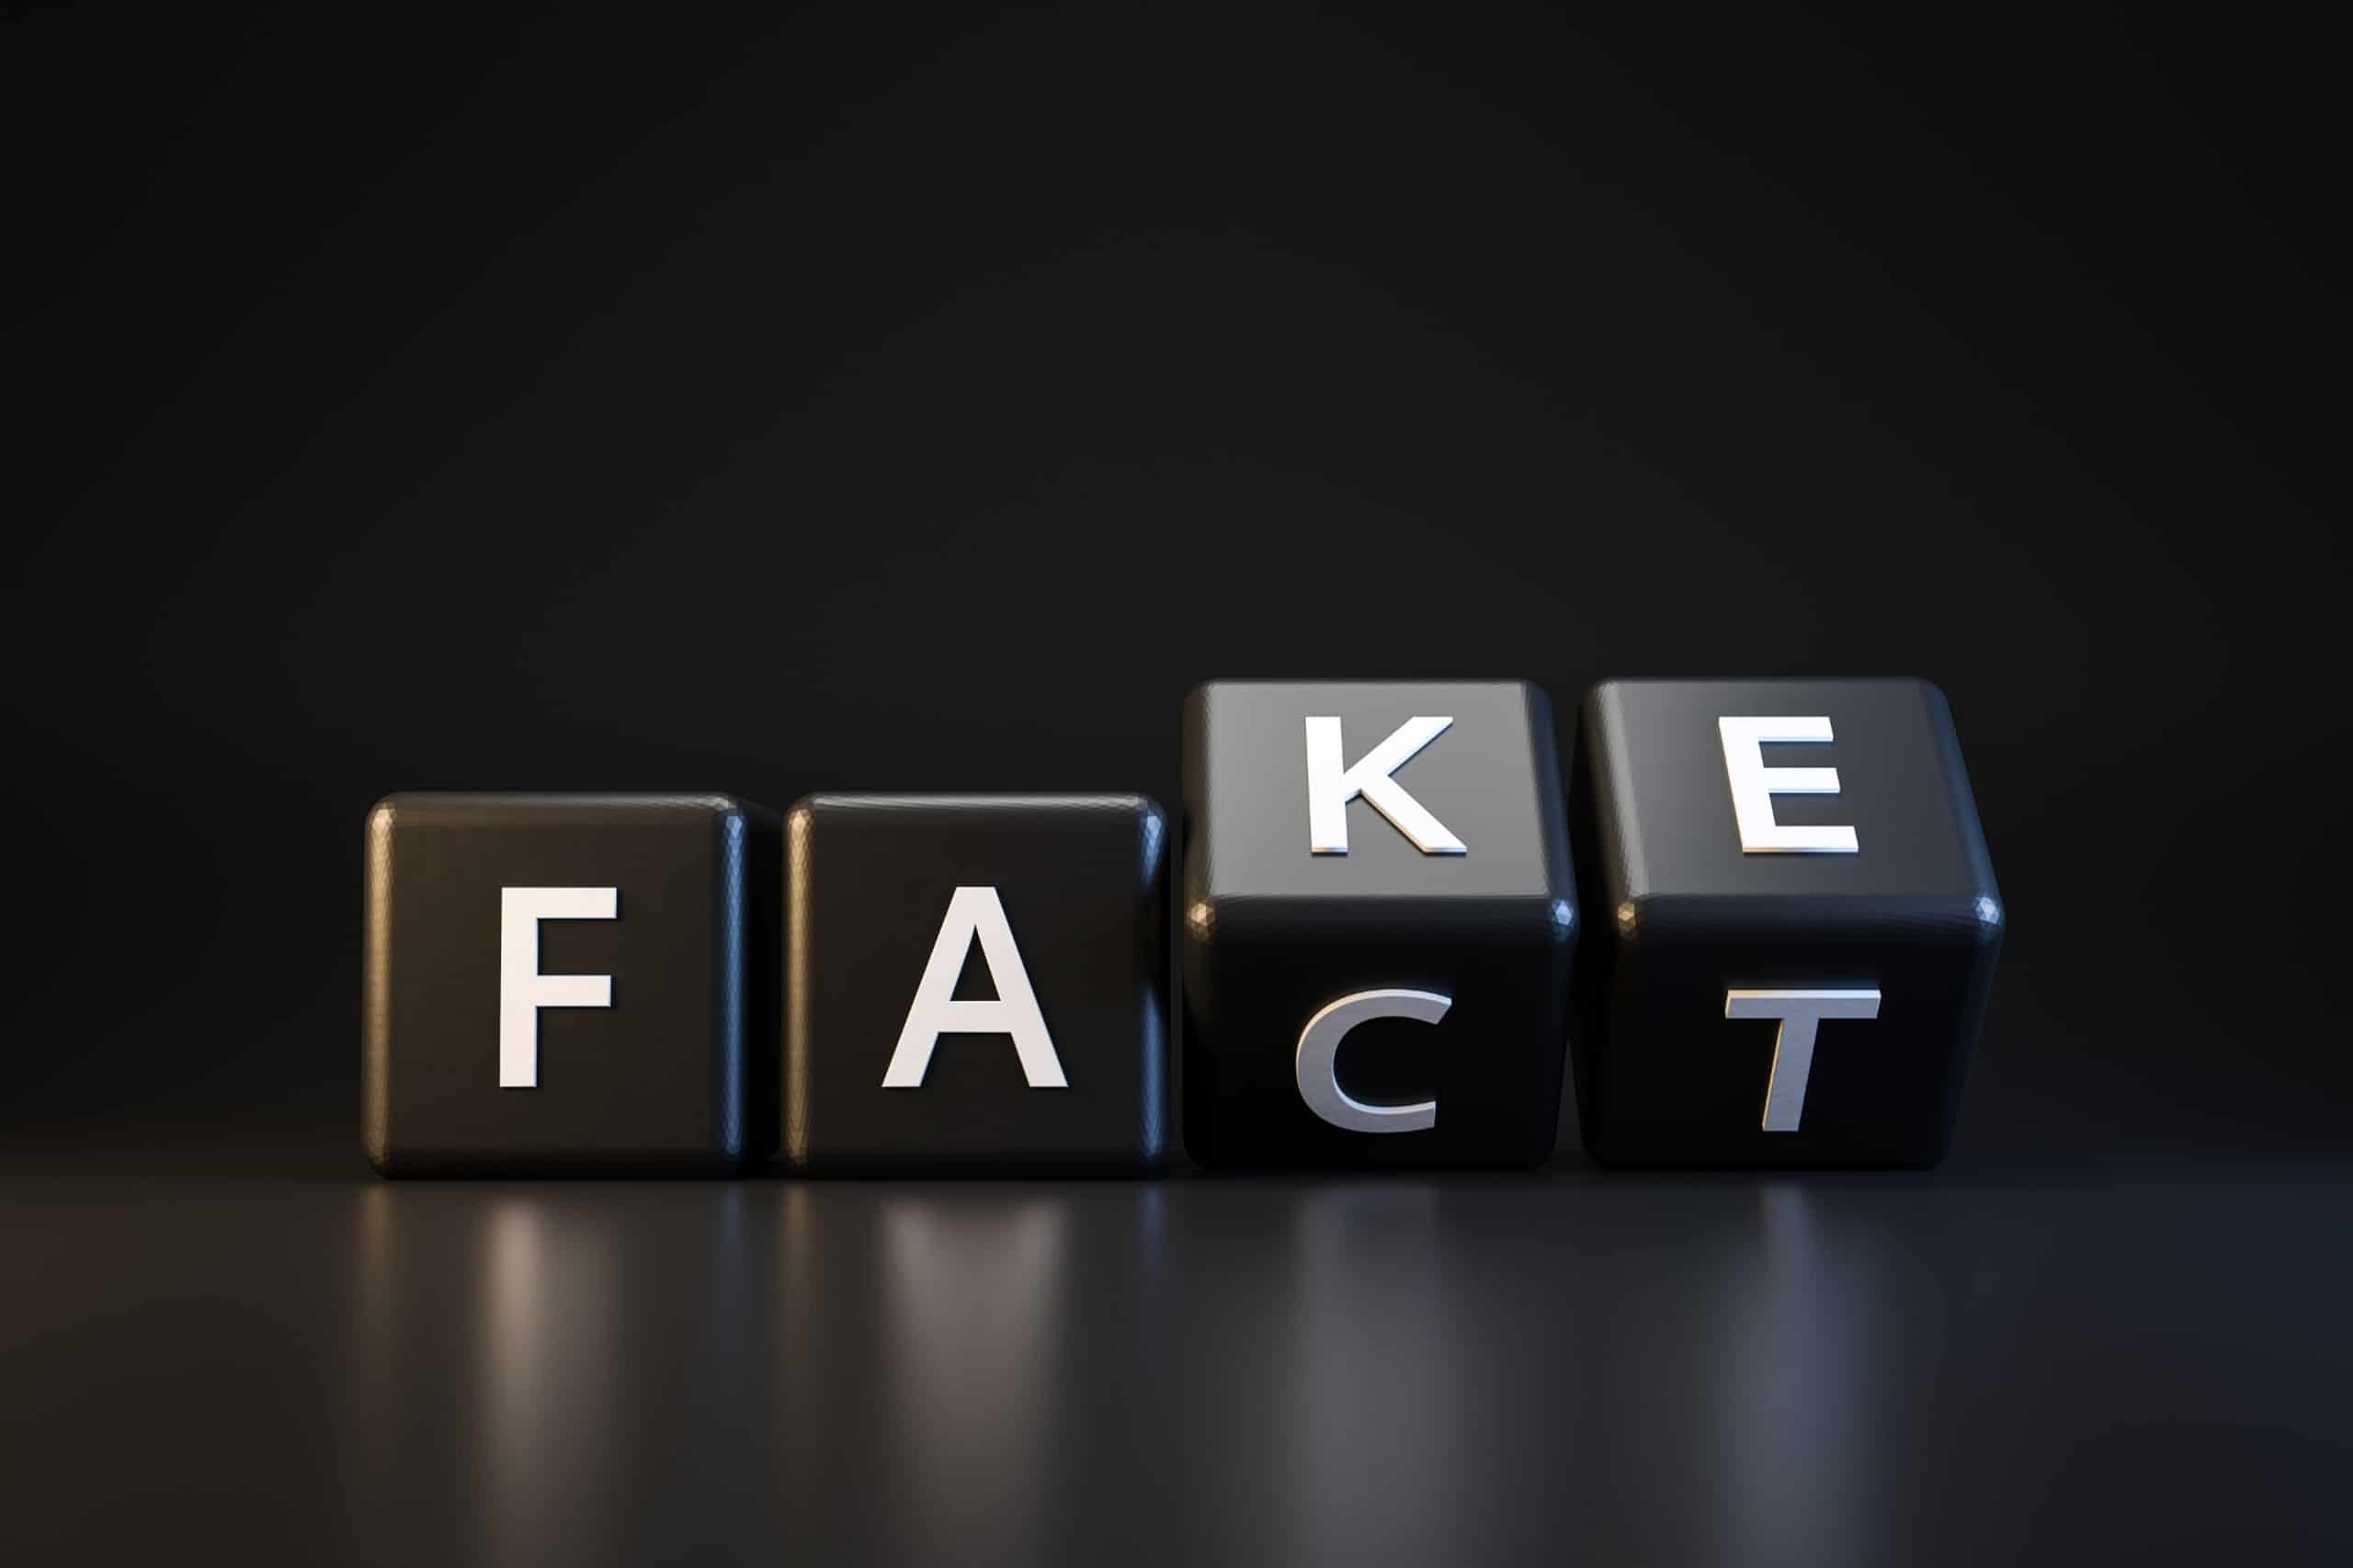 Fake Facts or how the media misleads with facts